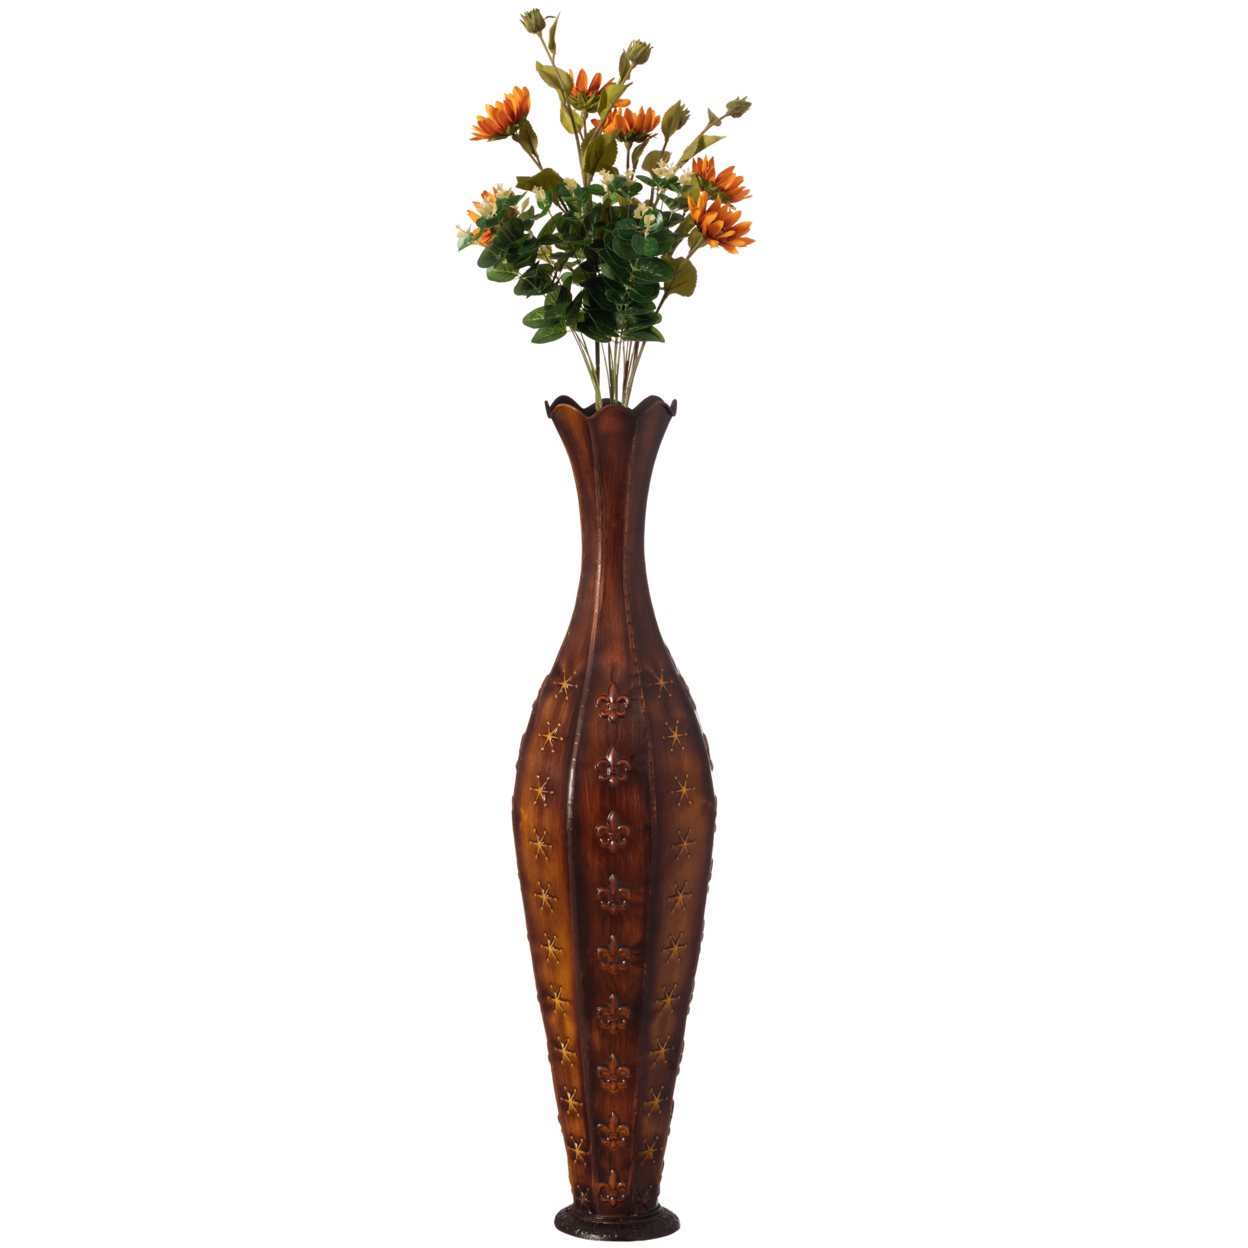 34'' Metal Decorative Floor Vase Centerpiece Home Decoration For Dried Flower And Artificial Floral Arrangements In Living Room Decor